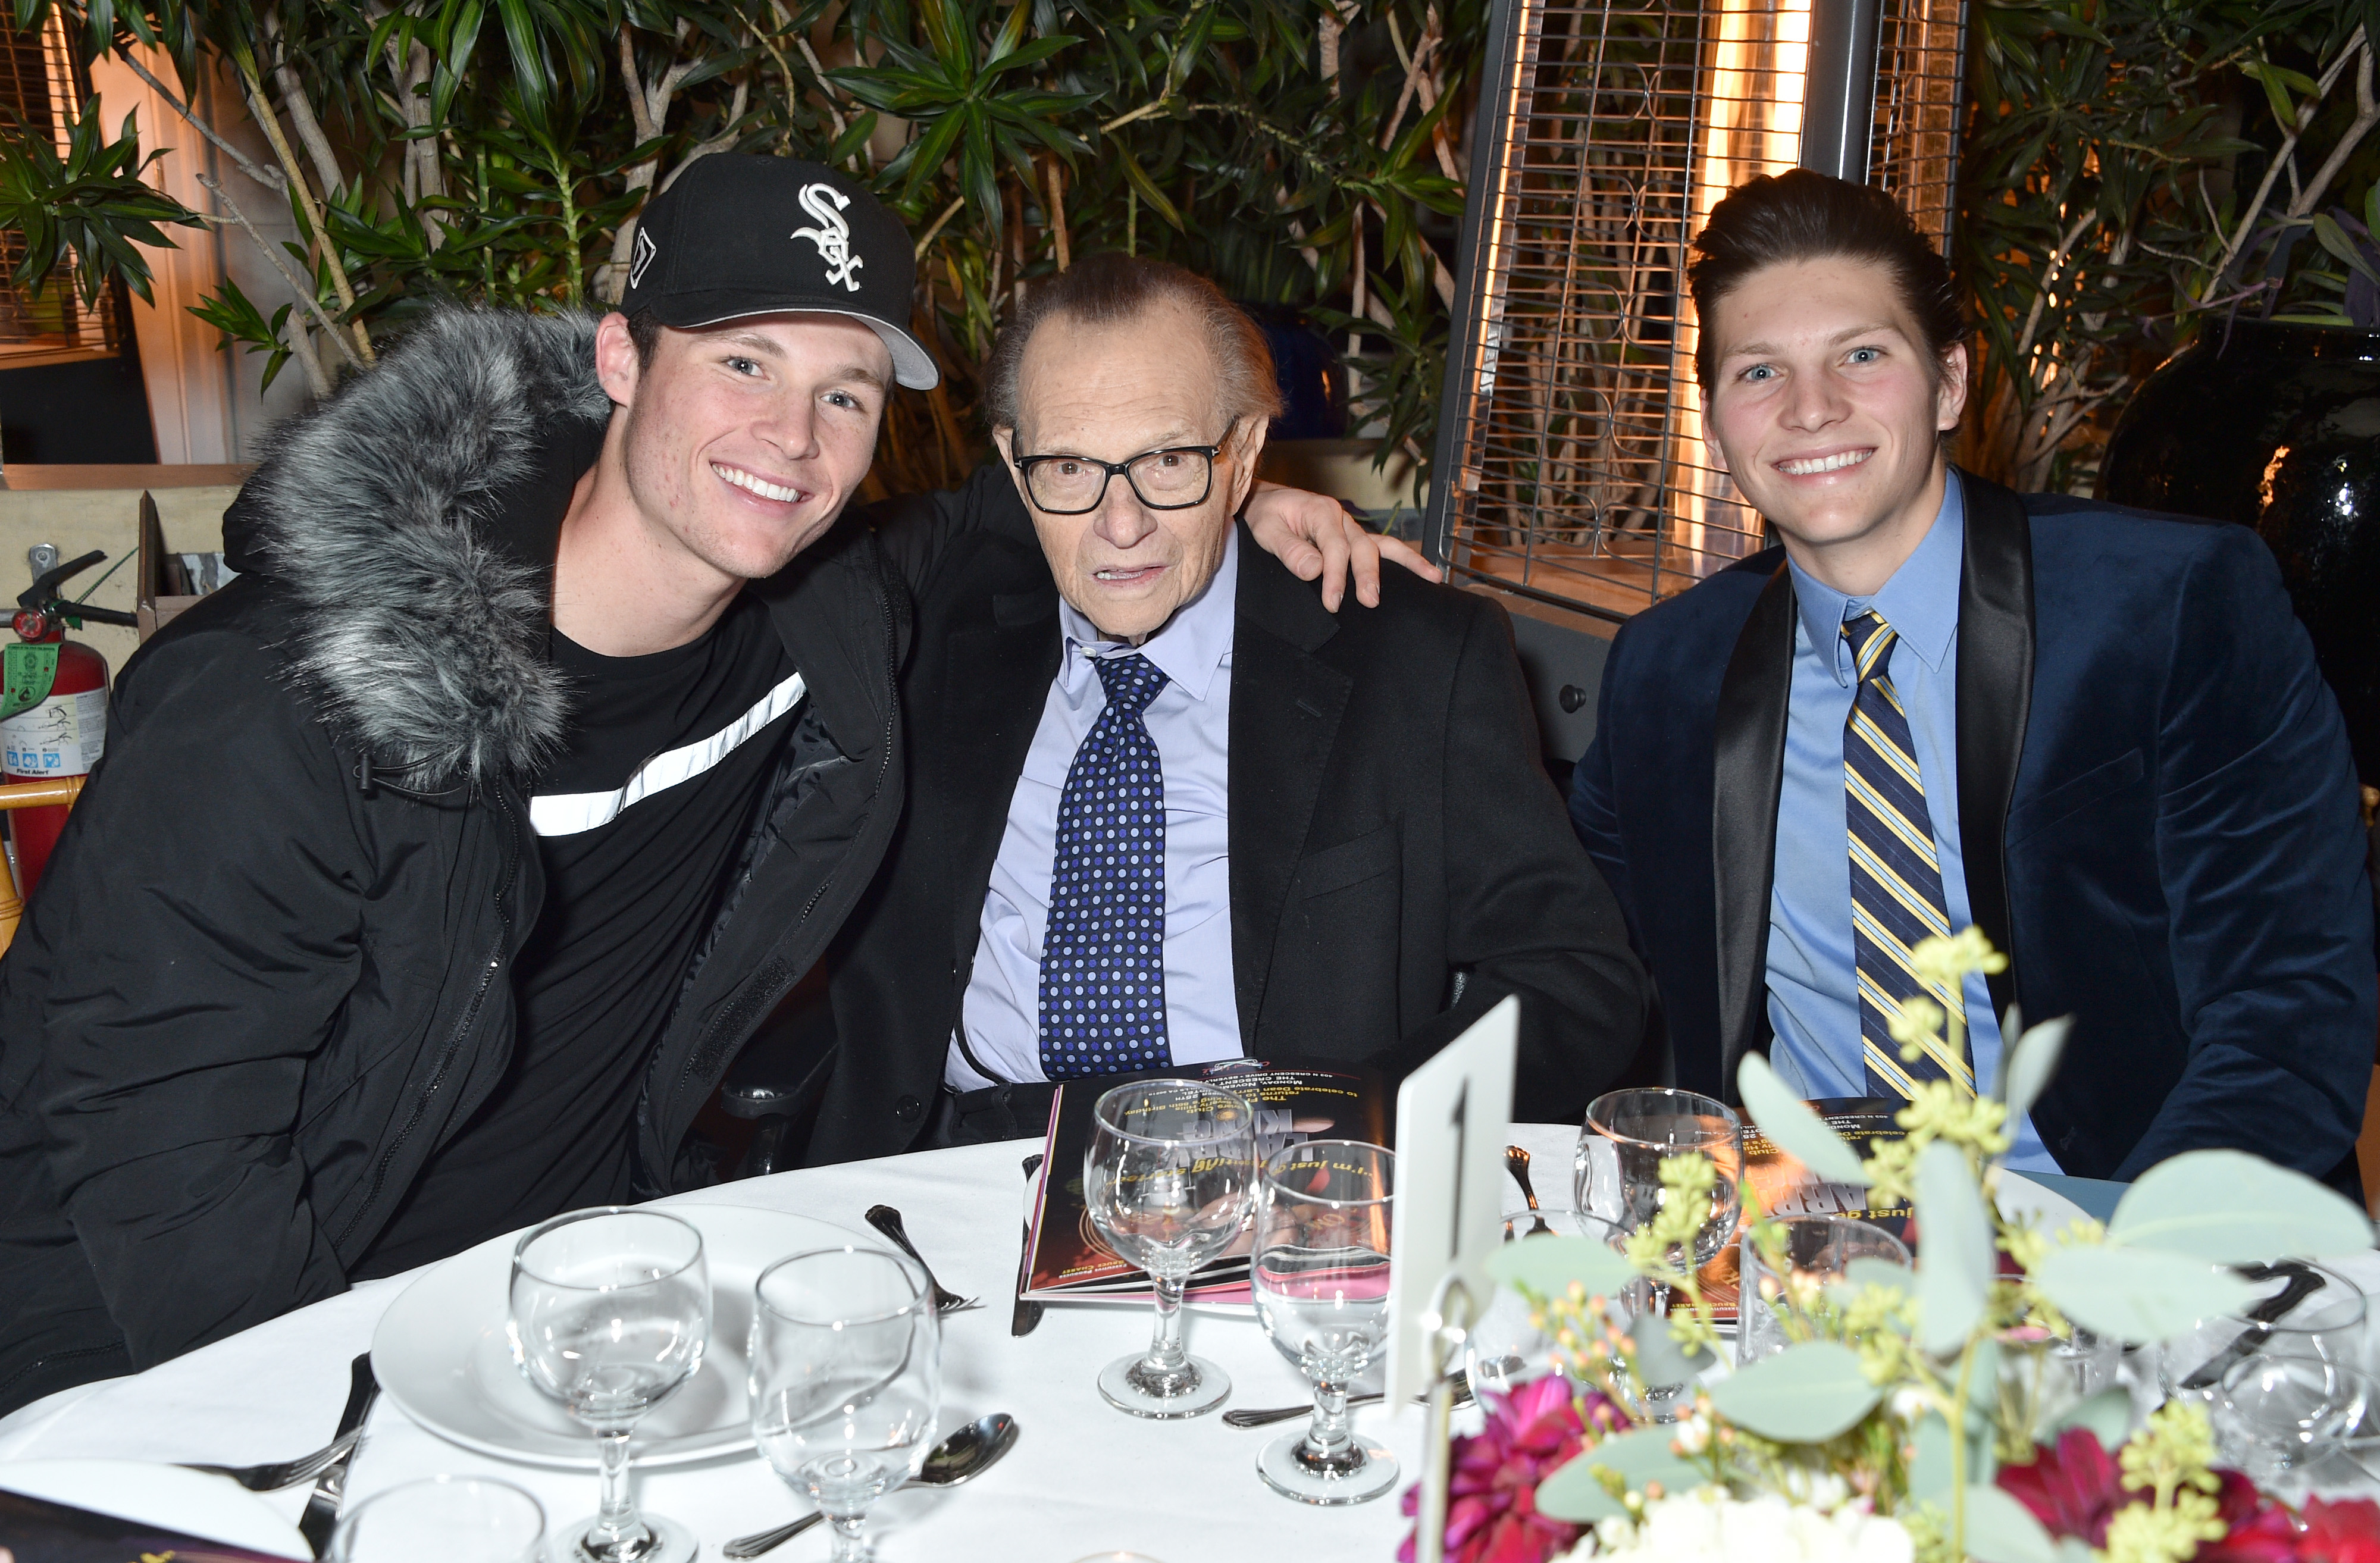 <p>Larry King's youngest children -- sons Cannon King (who was born in 2000) and Chance King (who was born in 1999) -- joined their dad when the Friars Club celebrated the broadcasting titan's 86th birthday in Beverly Hills in November 2019 -- a little more than a year before <a href="https://www.wonderwall.com/celebrity/hollywood-reacts-to-larry-kings-death-420022.gallery">the famed journalist died</a> after a battle with COVID-19. </p>